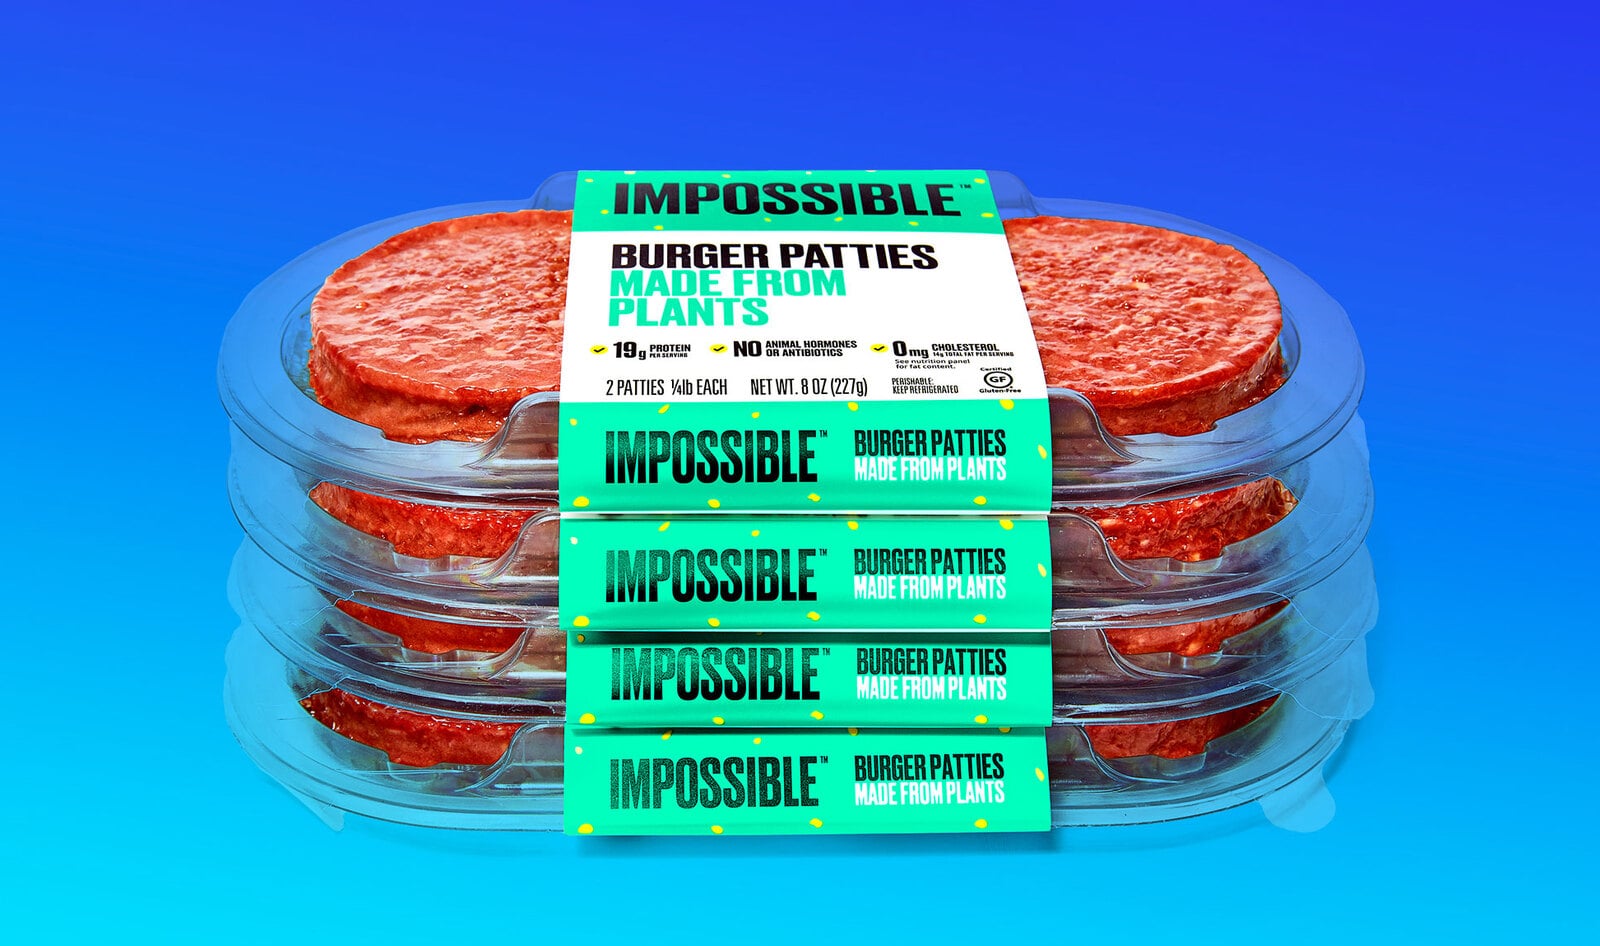 Impossible Burgers Are About to Get Much Cheaper in Stores